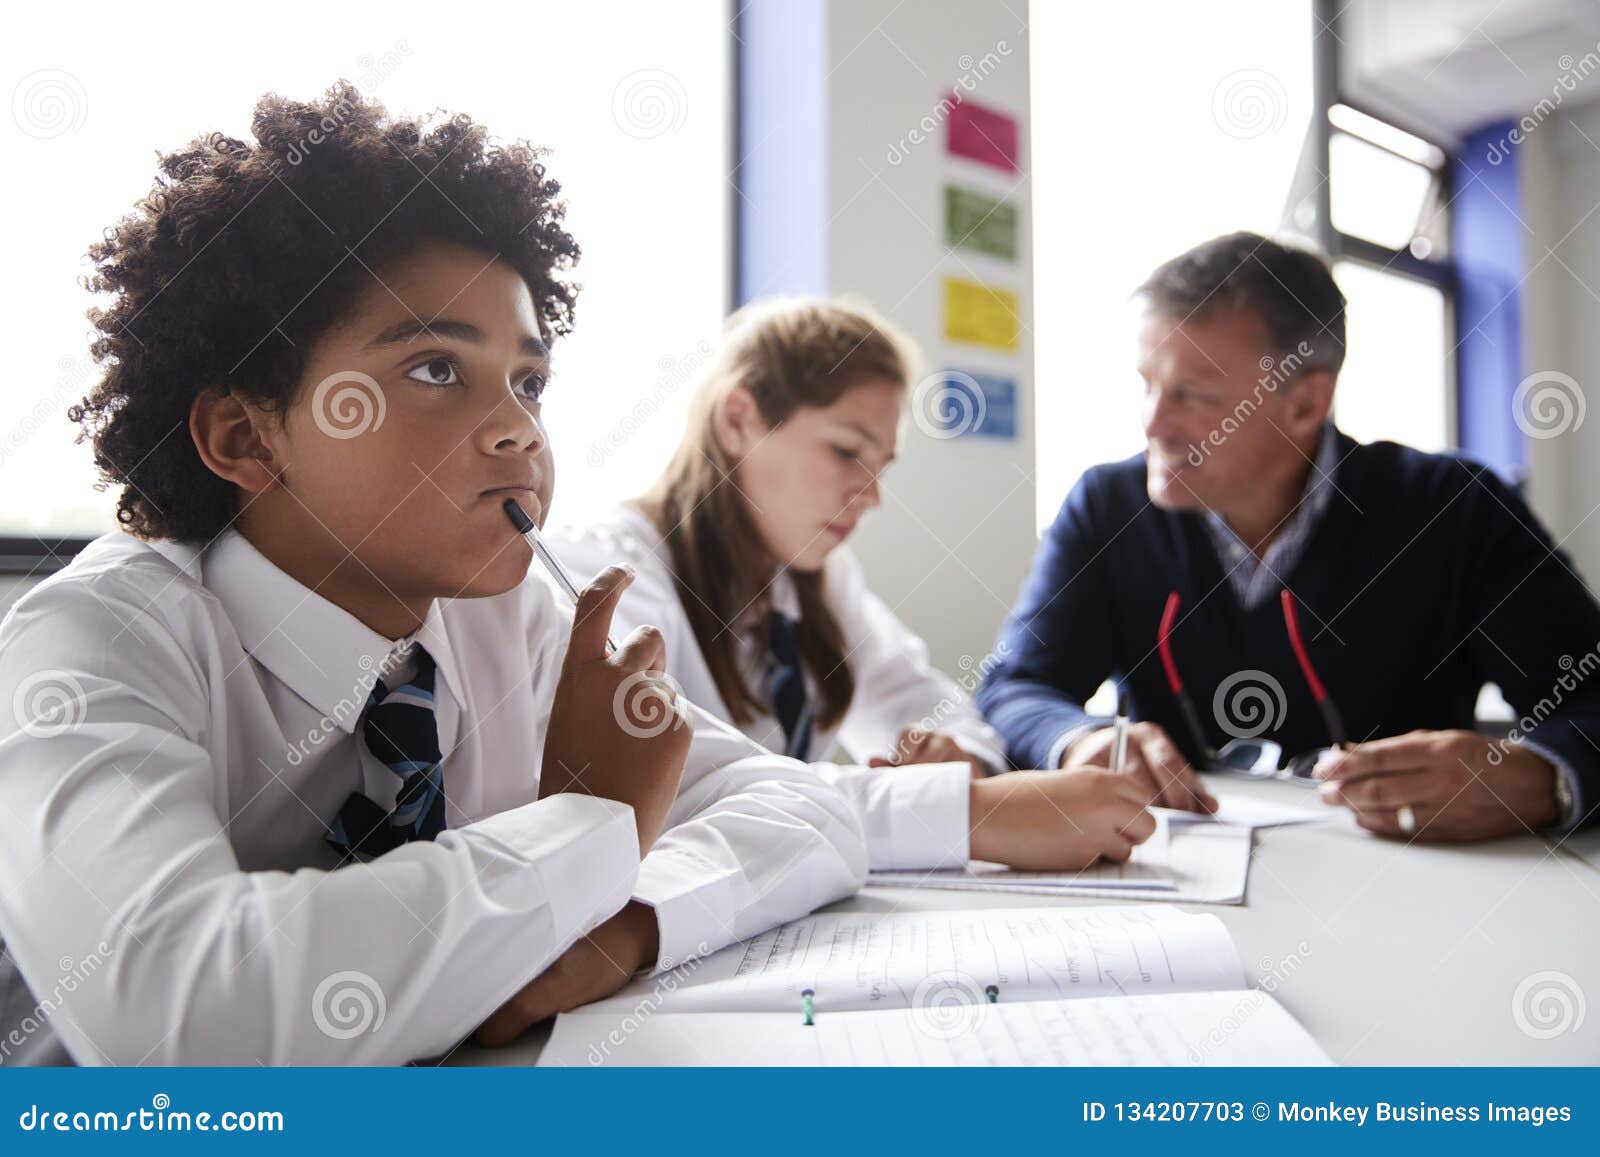 concentrating male high school student wearing uniform working at table with teacher talking to pupils in background